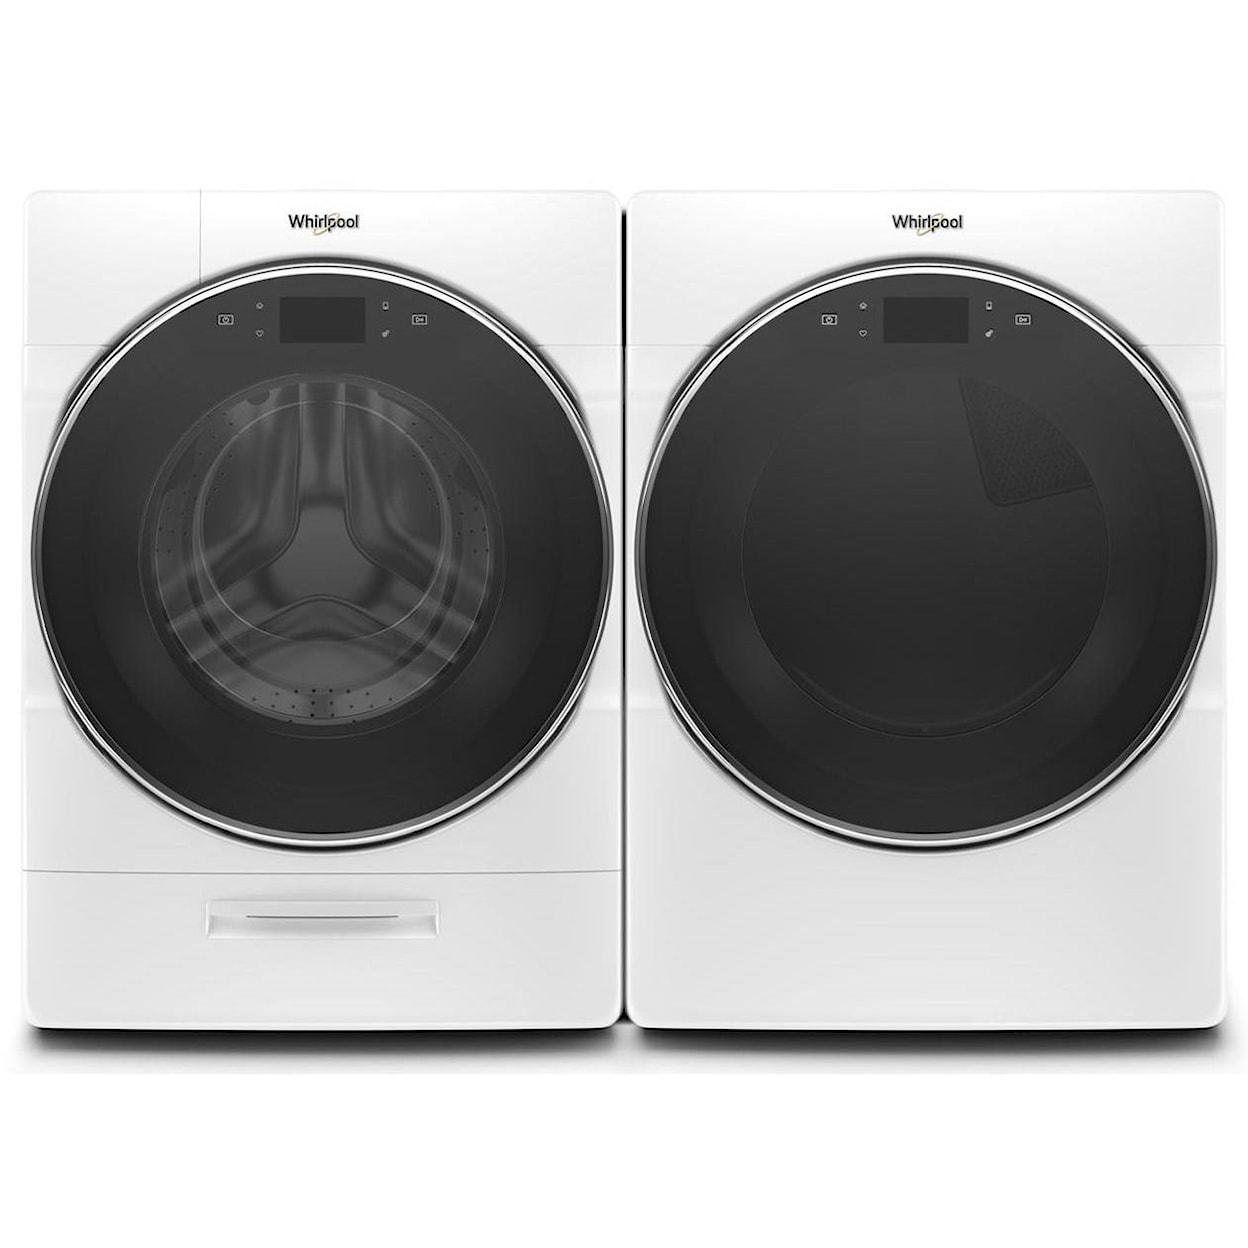 Whirlpool Washers 5.0 cu. ft. Smart Front Load Washer